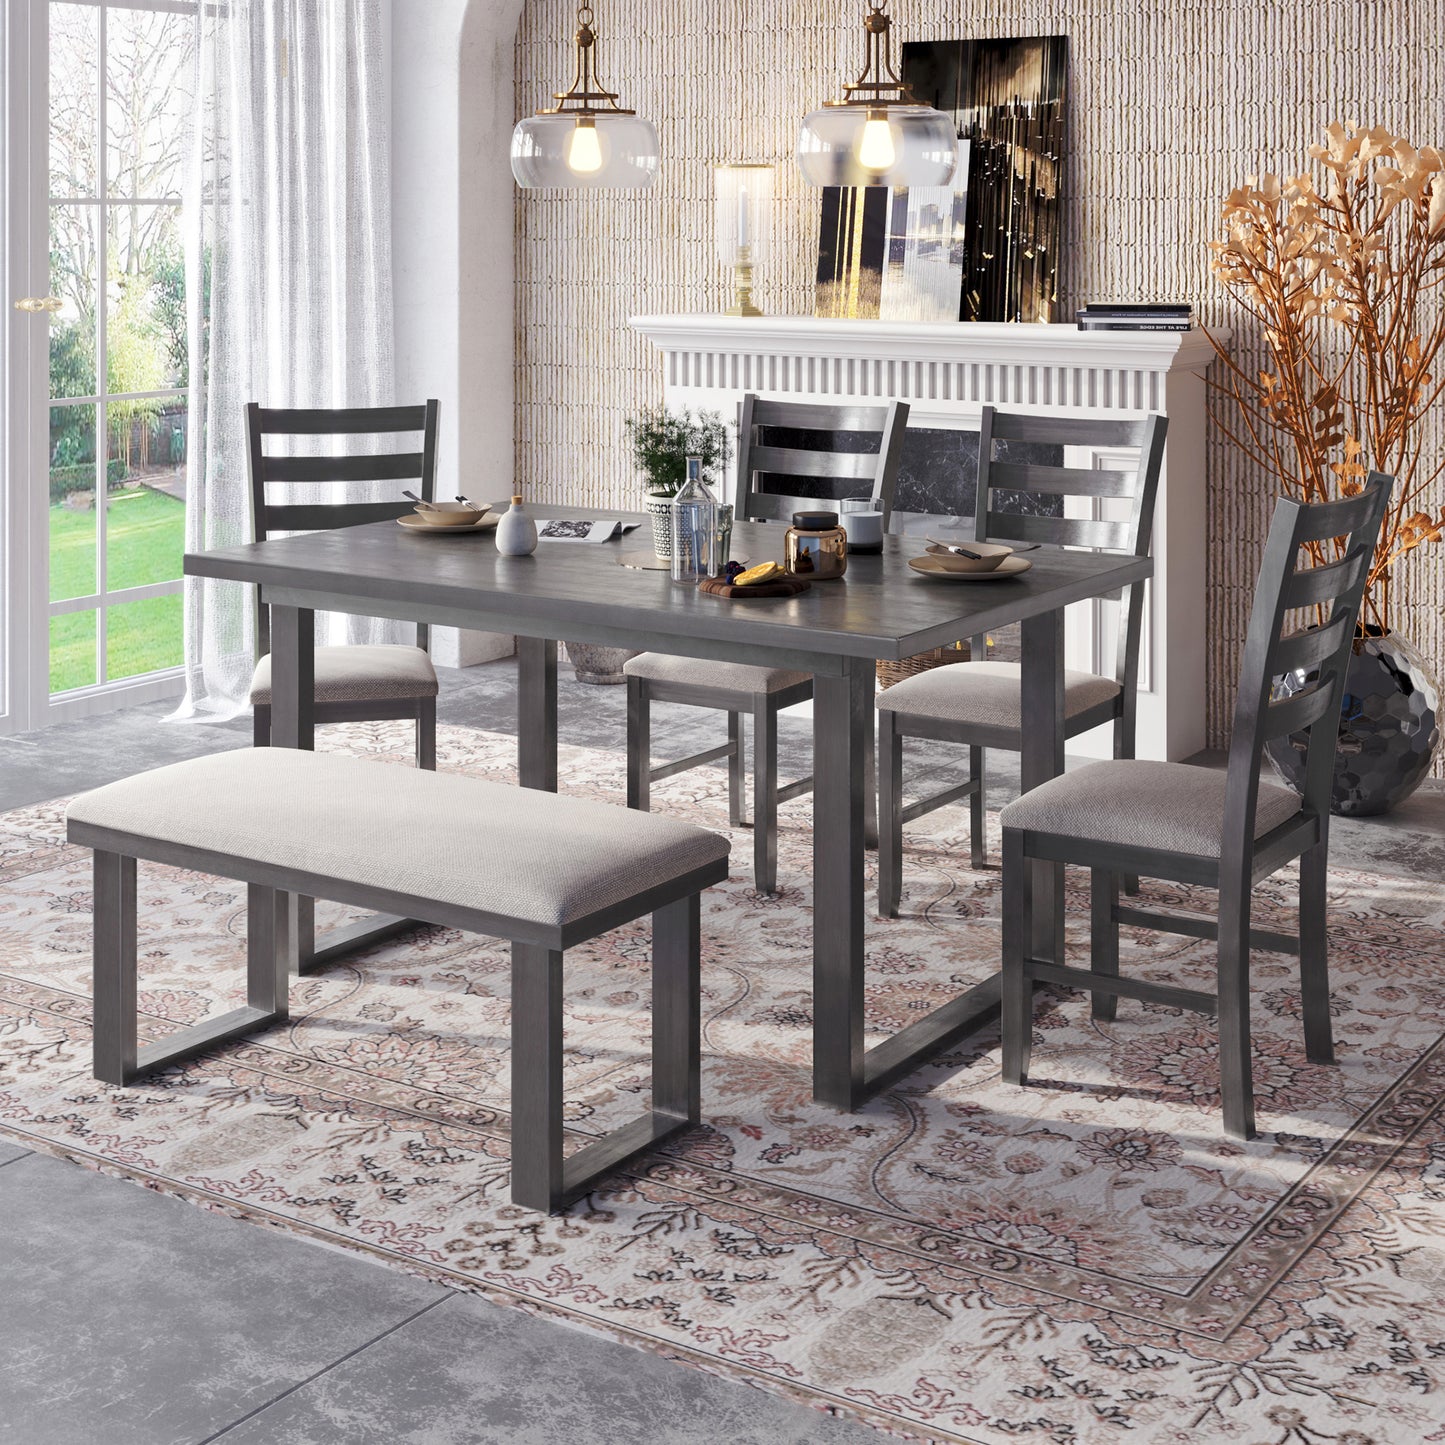 6-pieces solid wood dining table set